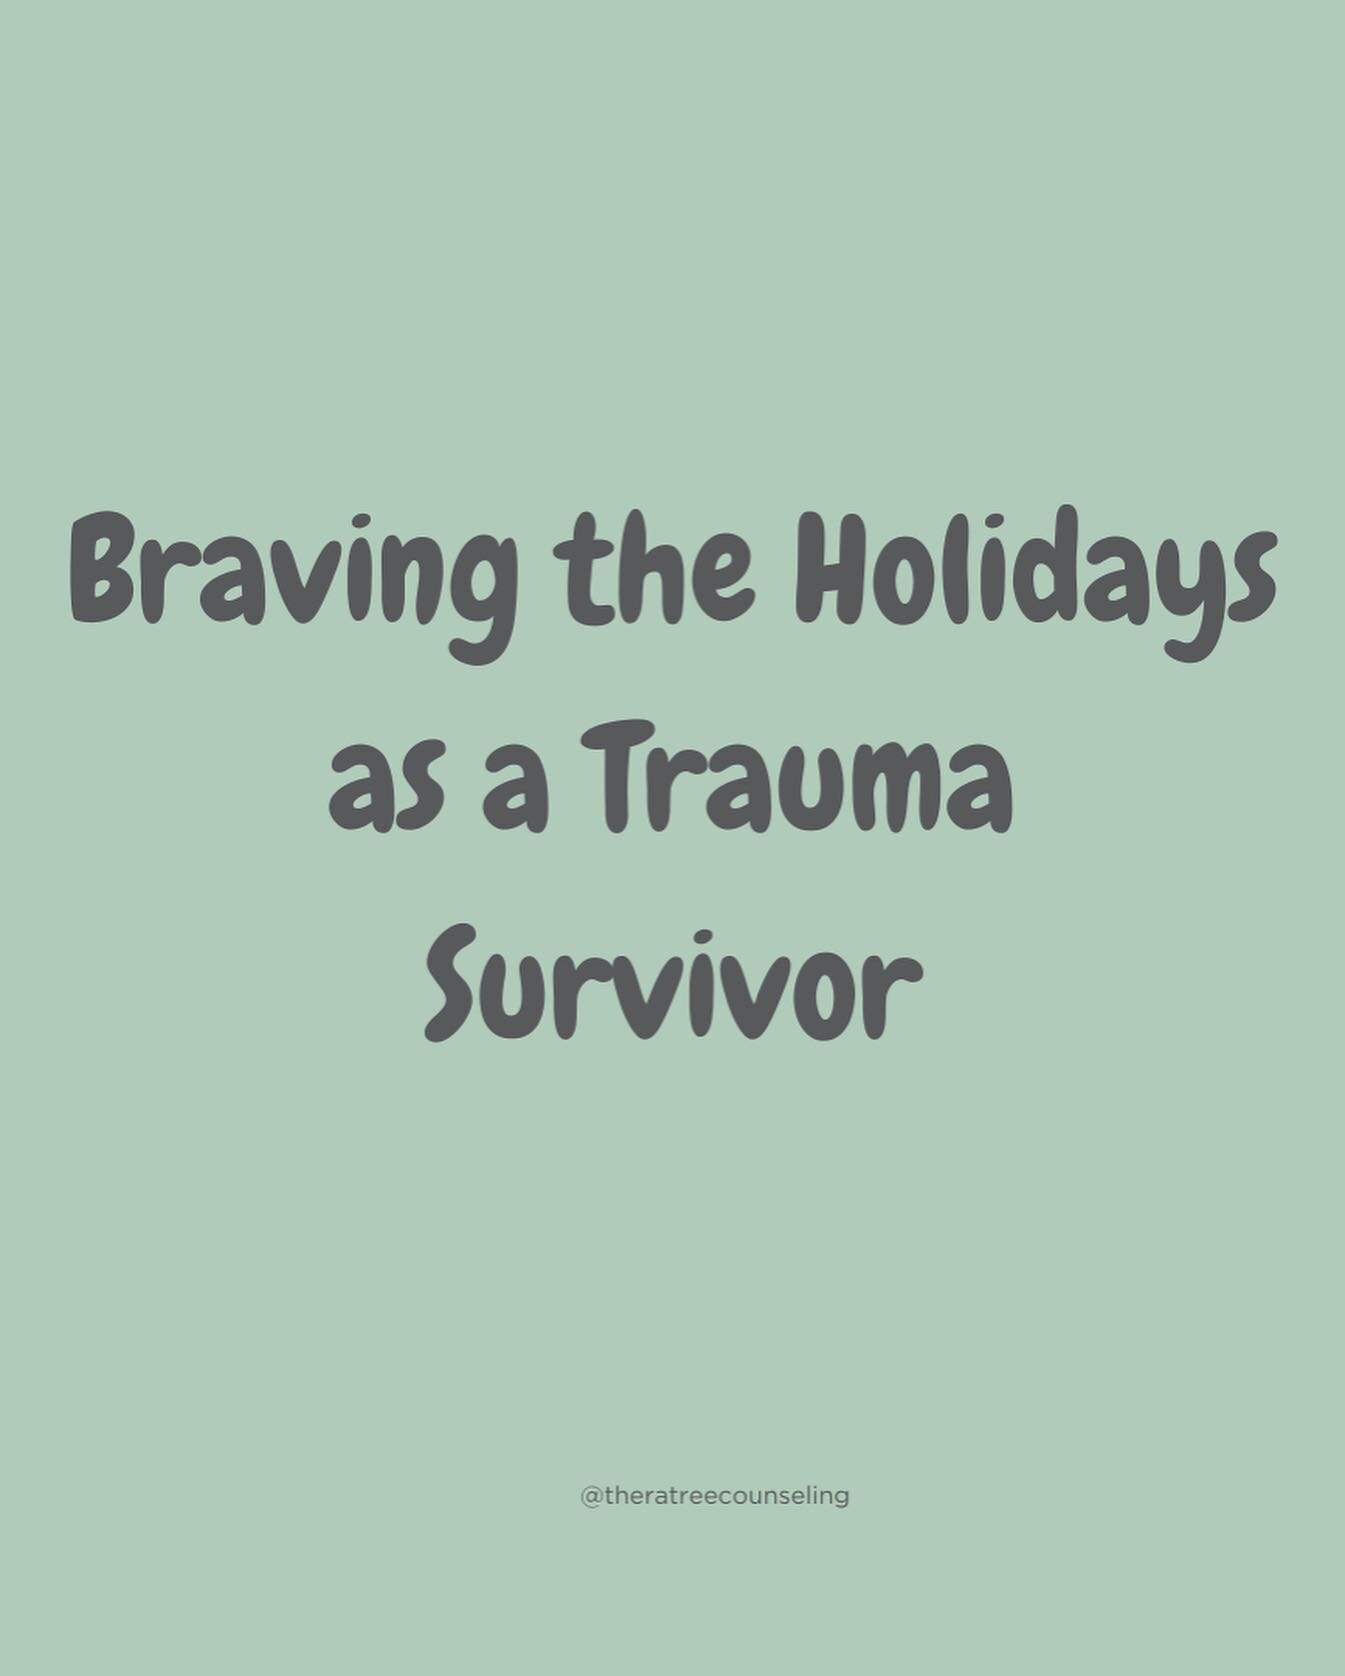 Repost: If you are a trauma survivor, here are some tips for coping with the holidays:
Allow yourself to grieve the losses that your trauma has brought you. Allow some time this season for your emotions to bubble up to the surface and be fully experi